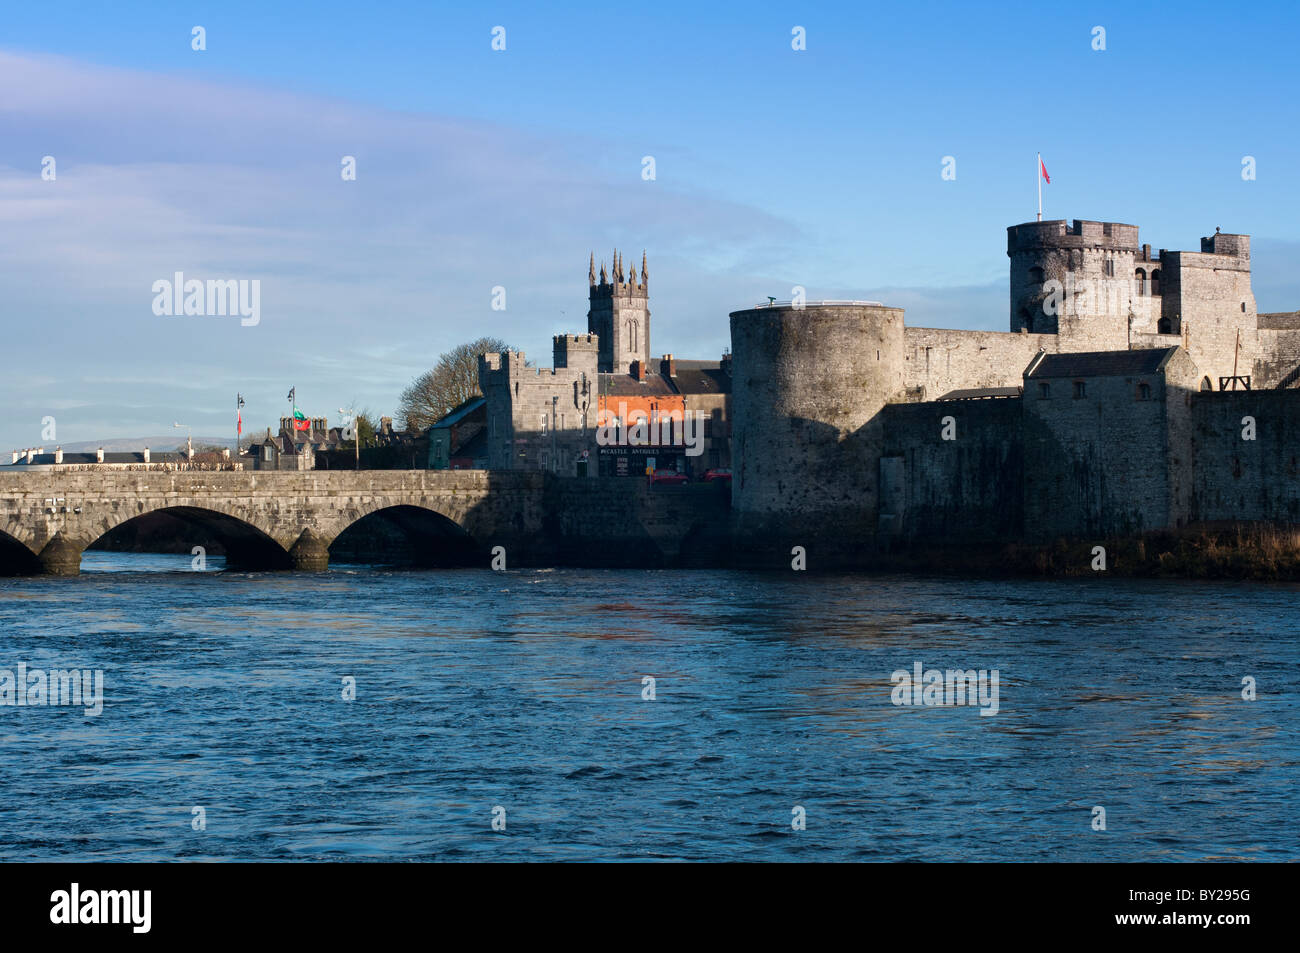 King John's Castle and the River Shannon, Limerick, County Limerick, Munster, Republic of Ireland (Eire) Europe. Stock Photo